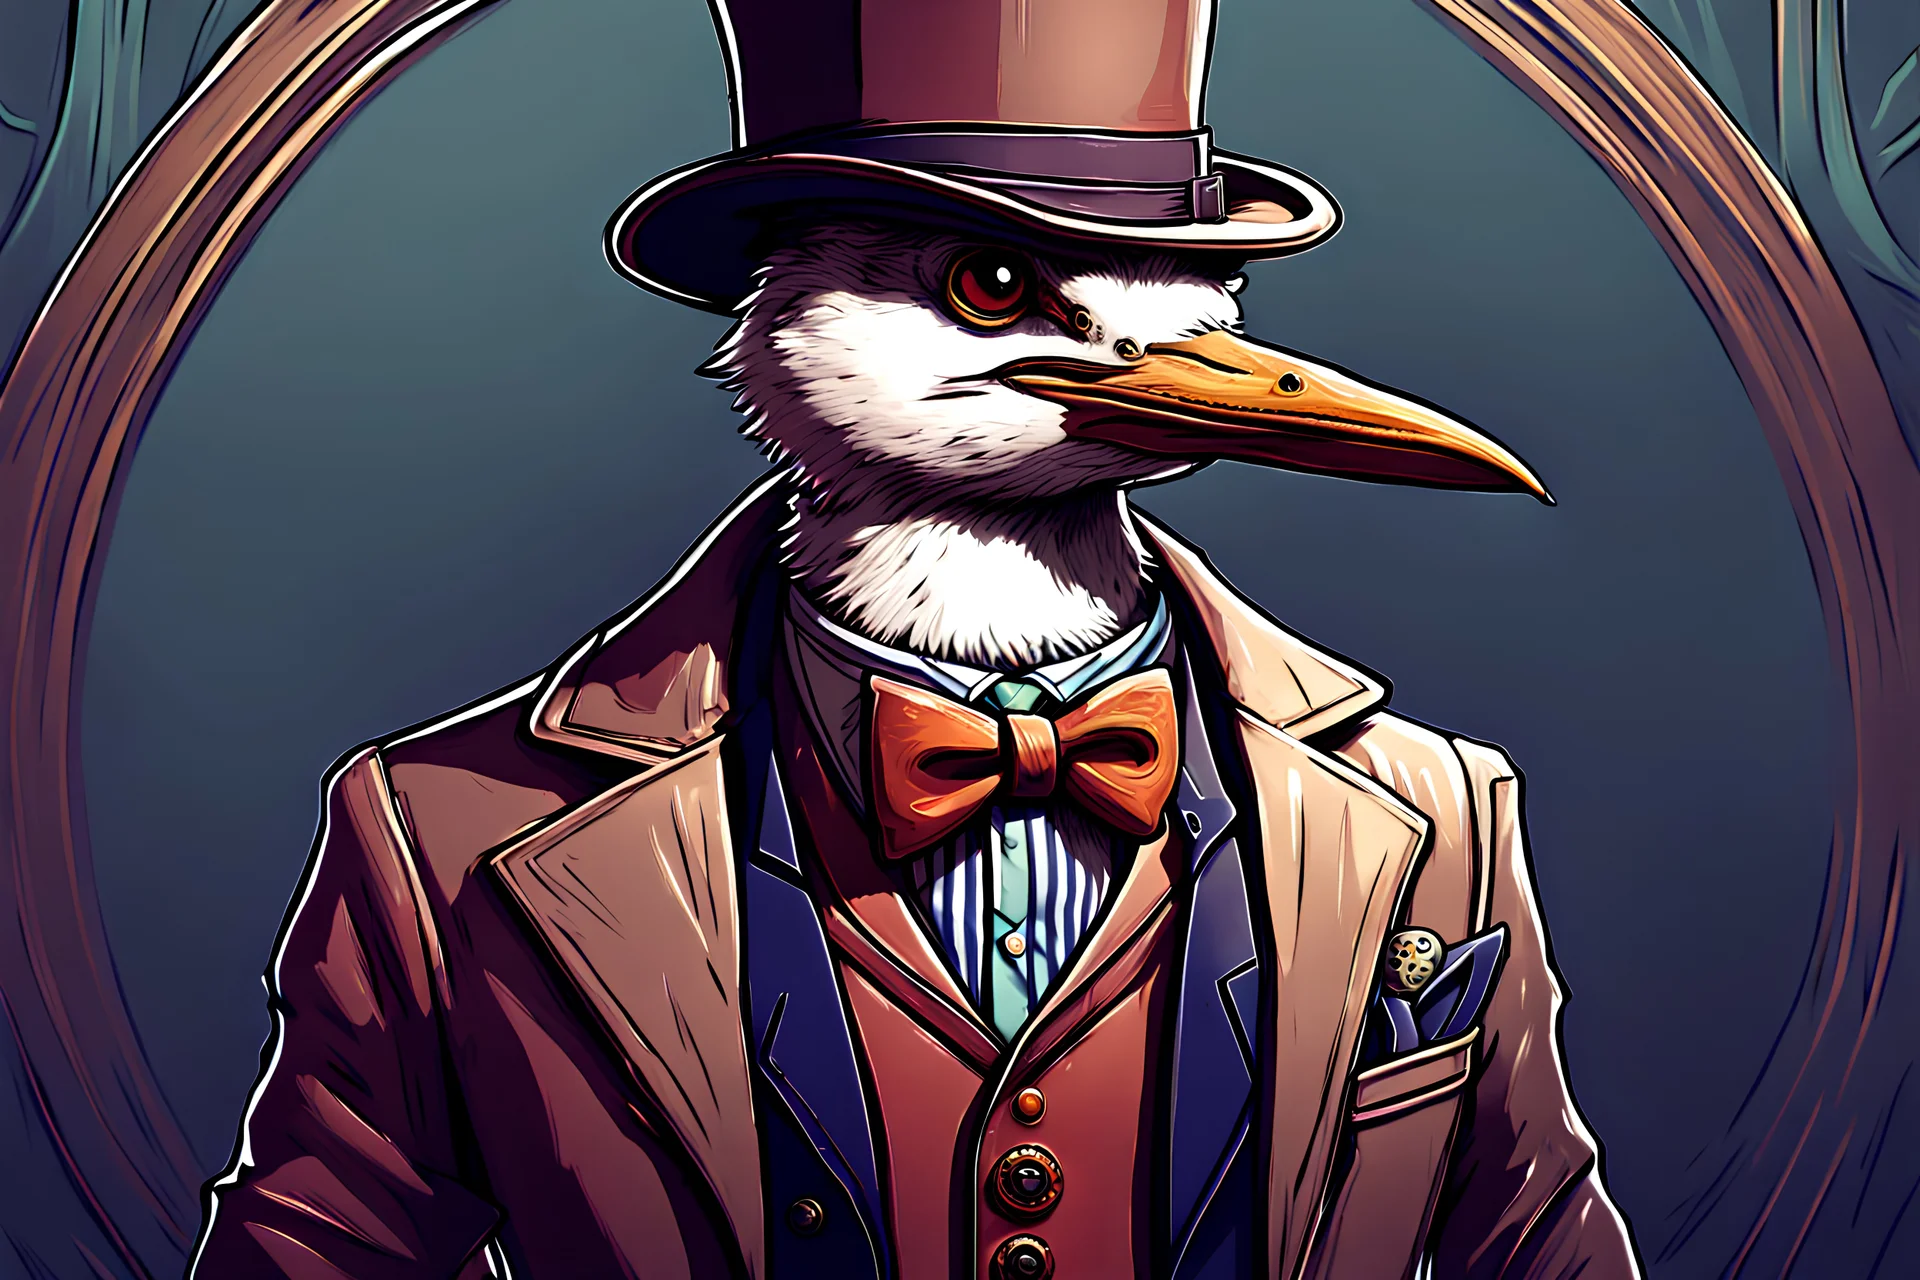 there is a bird wearing a hat and a coat with a tie, lofi steampunk bioshock portrait, anthro portrait, heron prestorn, dungeons and dragons style, inspired by Moebius, beautiful 3 d rendering, laughing groom, human-animal hybrid, jake parker